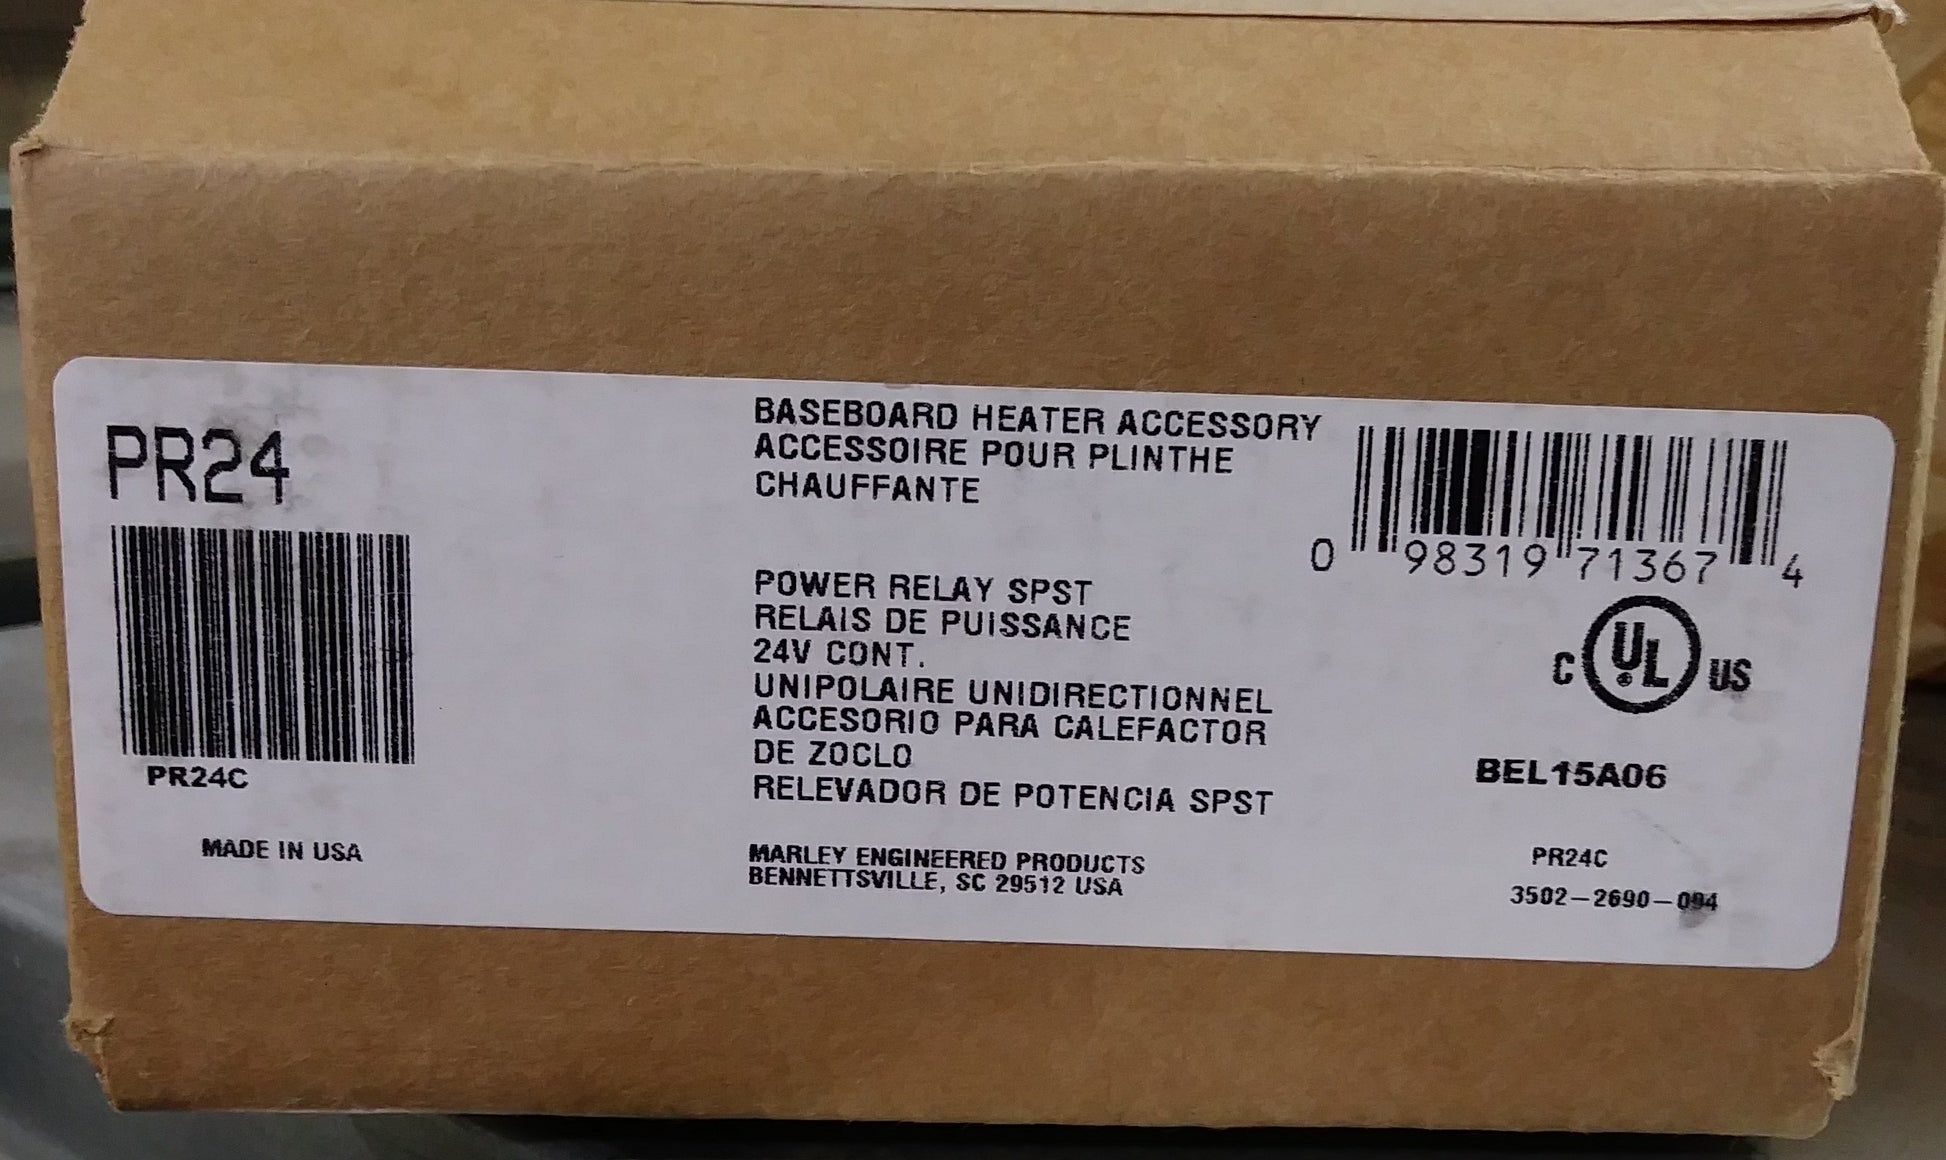 24 V SPST POWER RELAY FOR 1800,1900,2500,2600,C1800 & C2500 SERIES BASEBOARD HEATERS